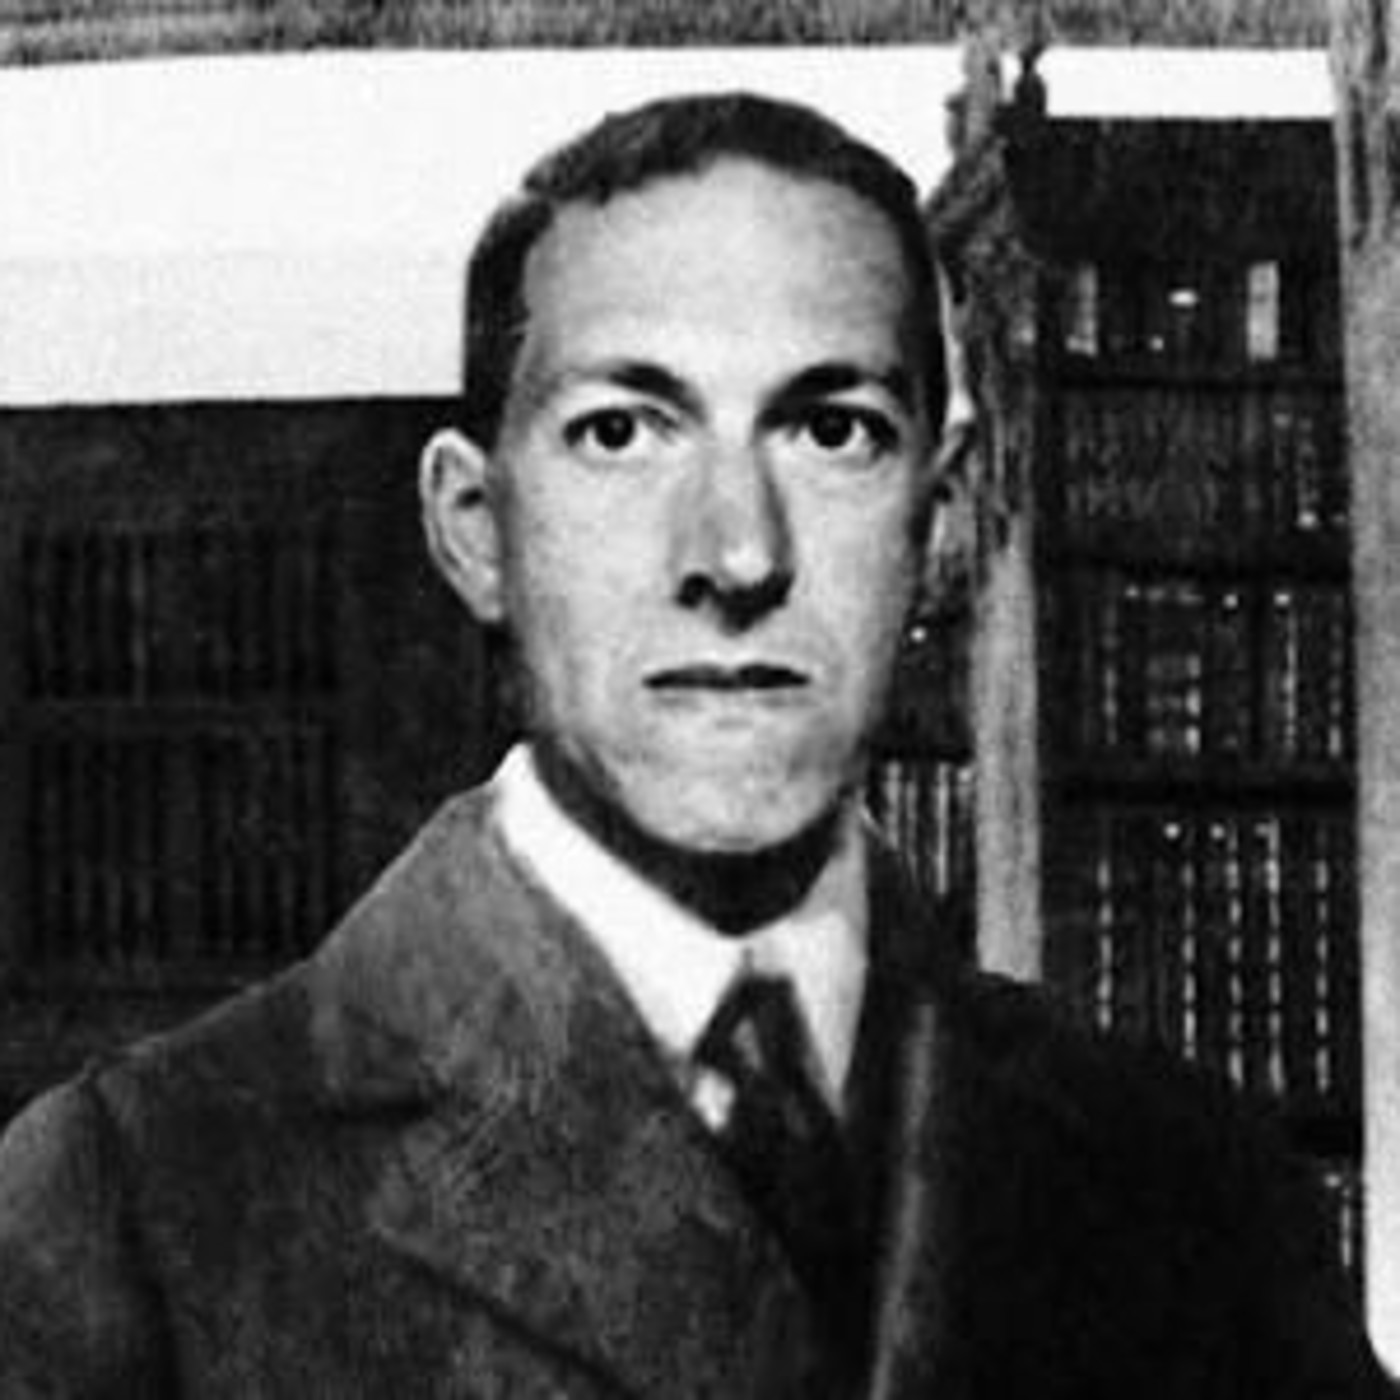 howard phillips lovecraft the cats of ulthar